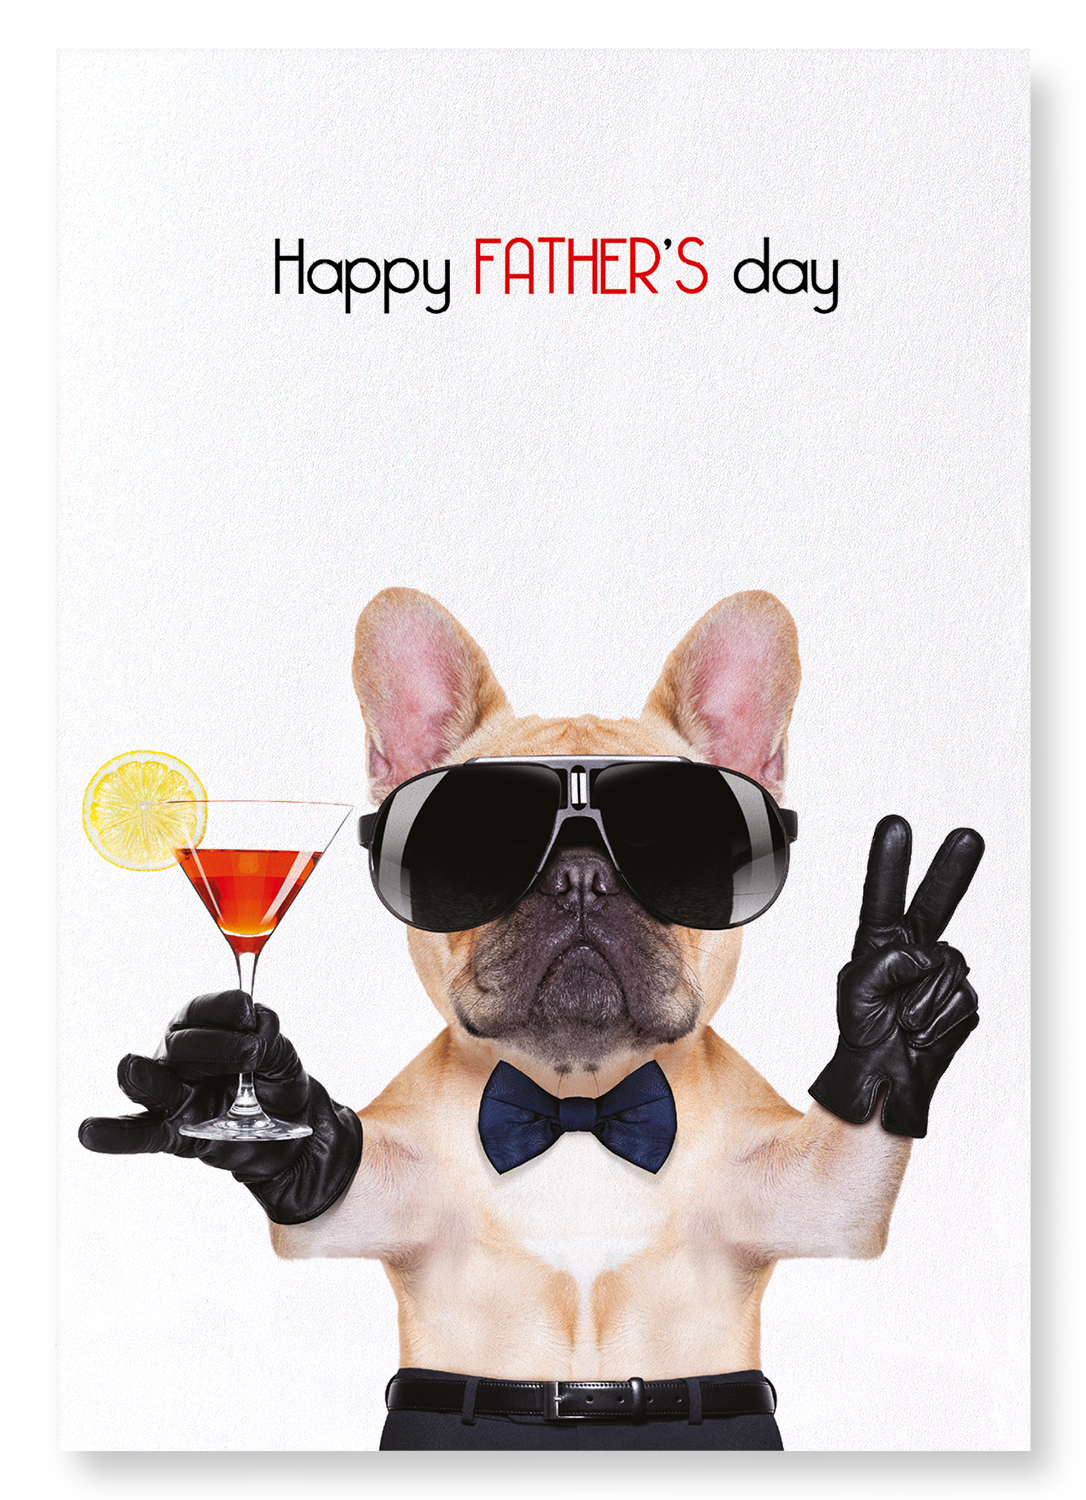 HAPPY FATHER'S DAY FRENCHIE: Funny Animal Art print